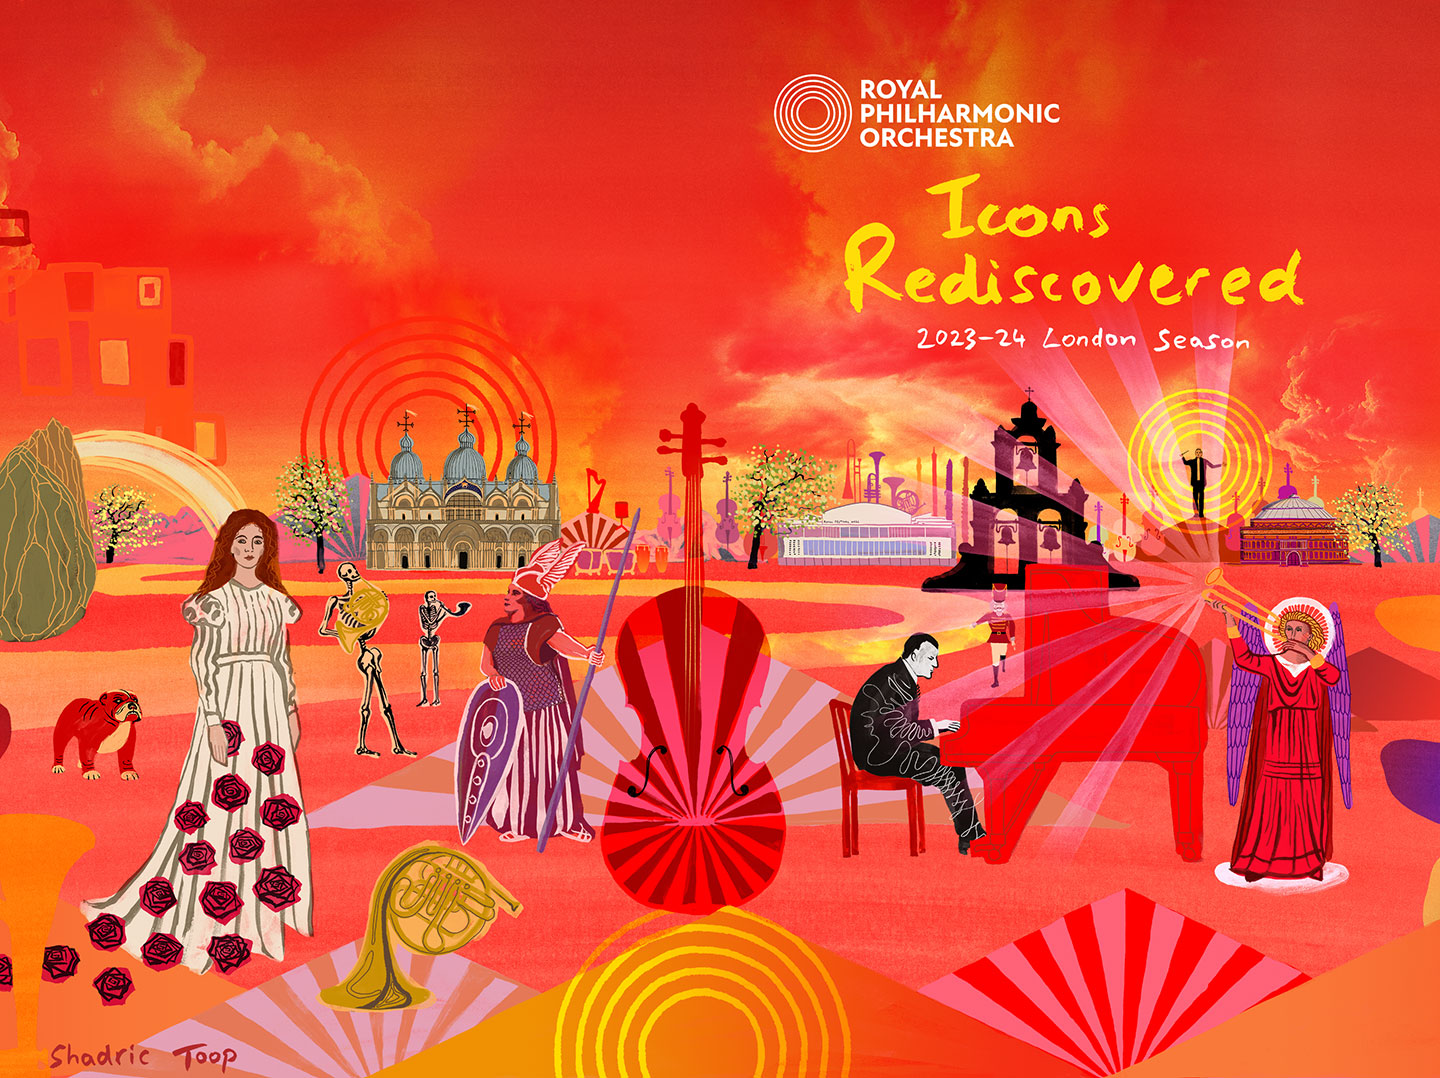 Royal Philharmonic Orchestra illustrations - Icons Rediscovered artwork featuring a colourful symbolic landscape in reds, yellows and pinks with striped mountains, musicians, classical music venues such as the Royal Albert Hall and musical instruments - hero image - Shadric Toop